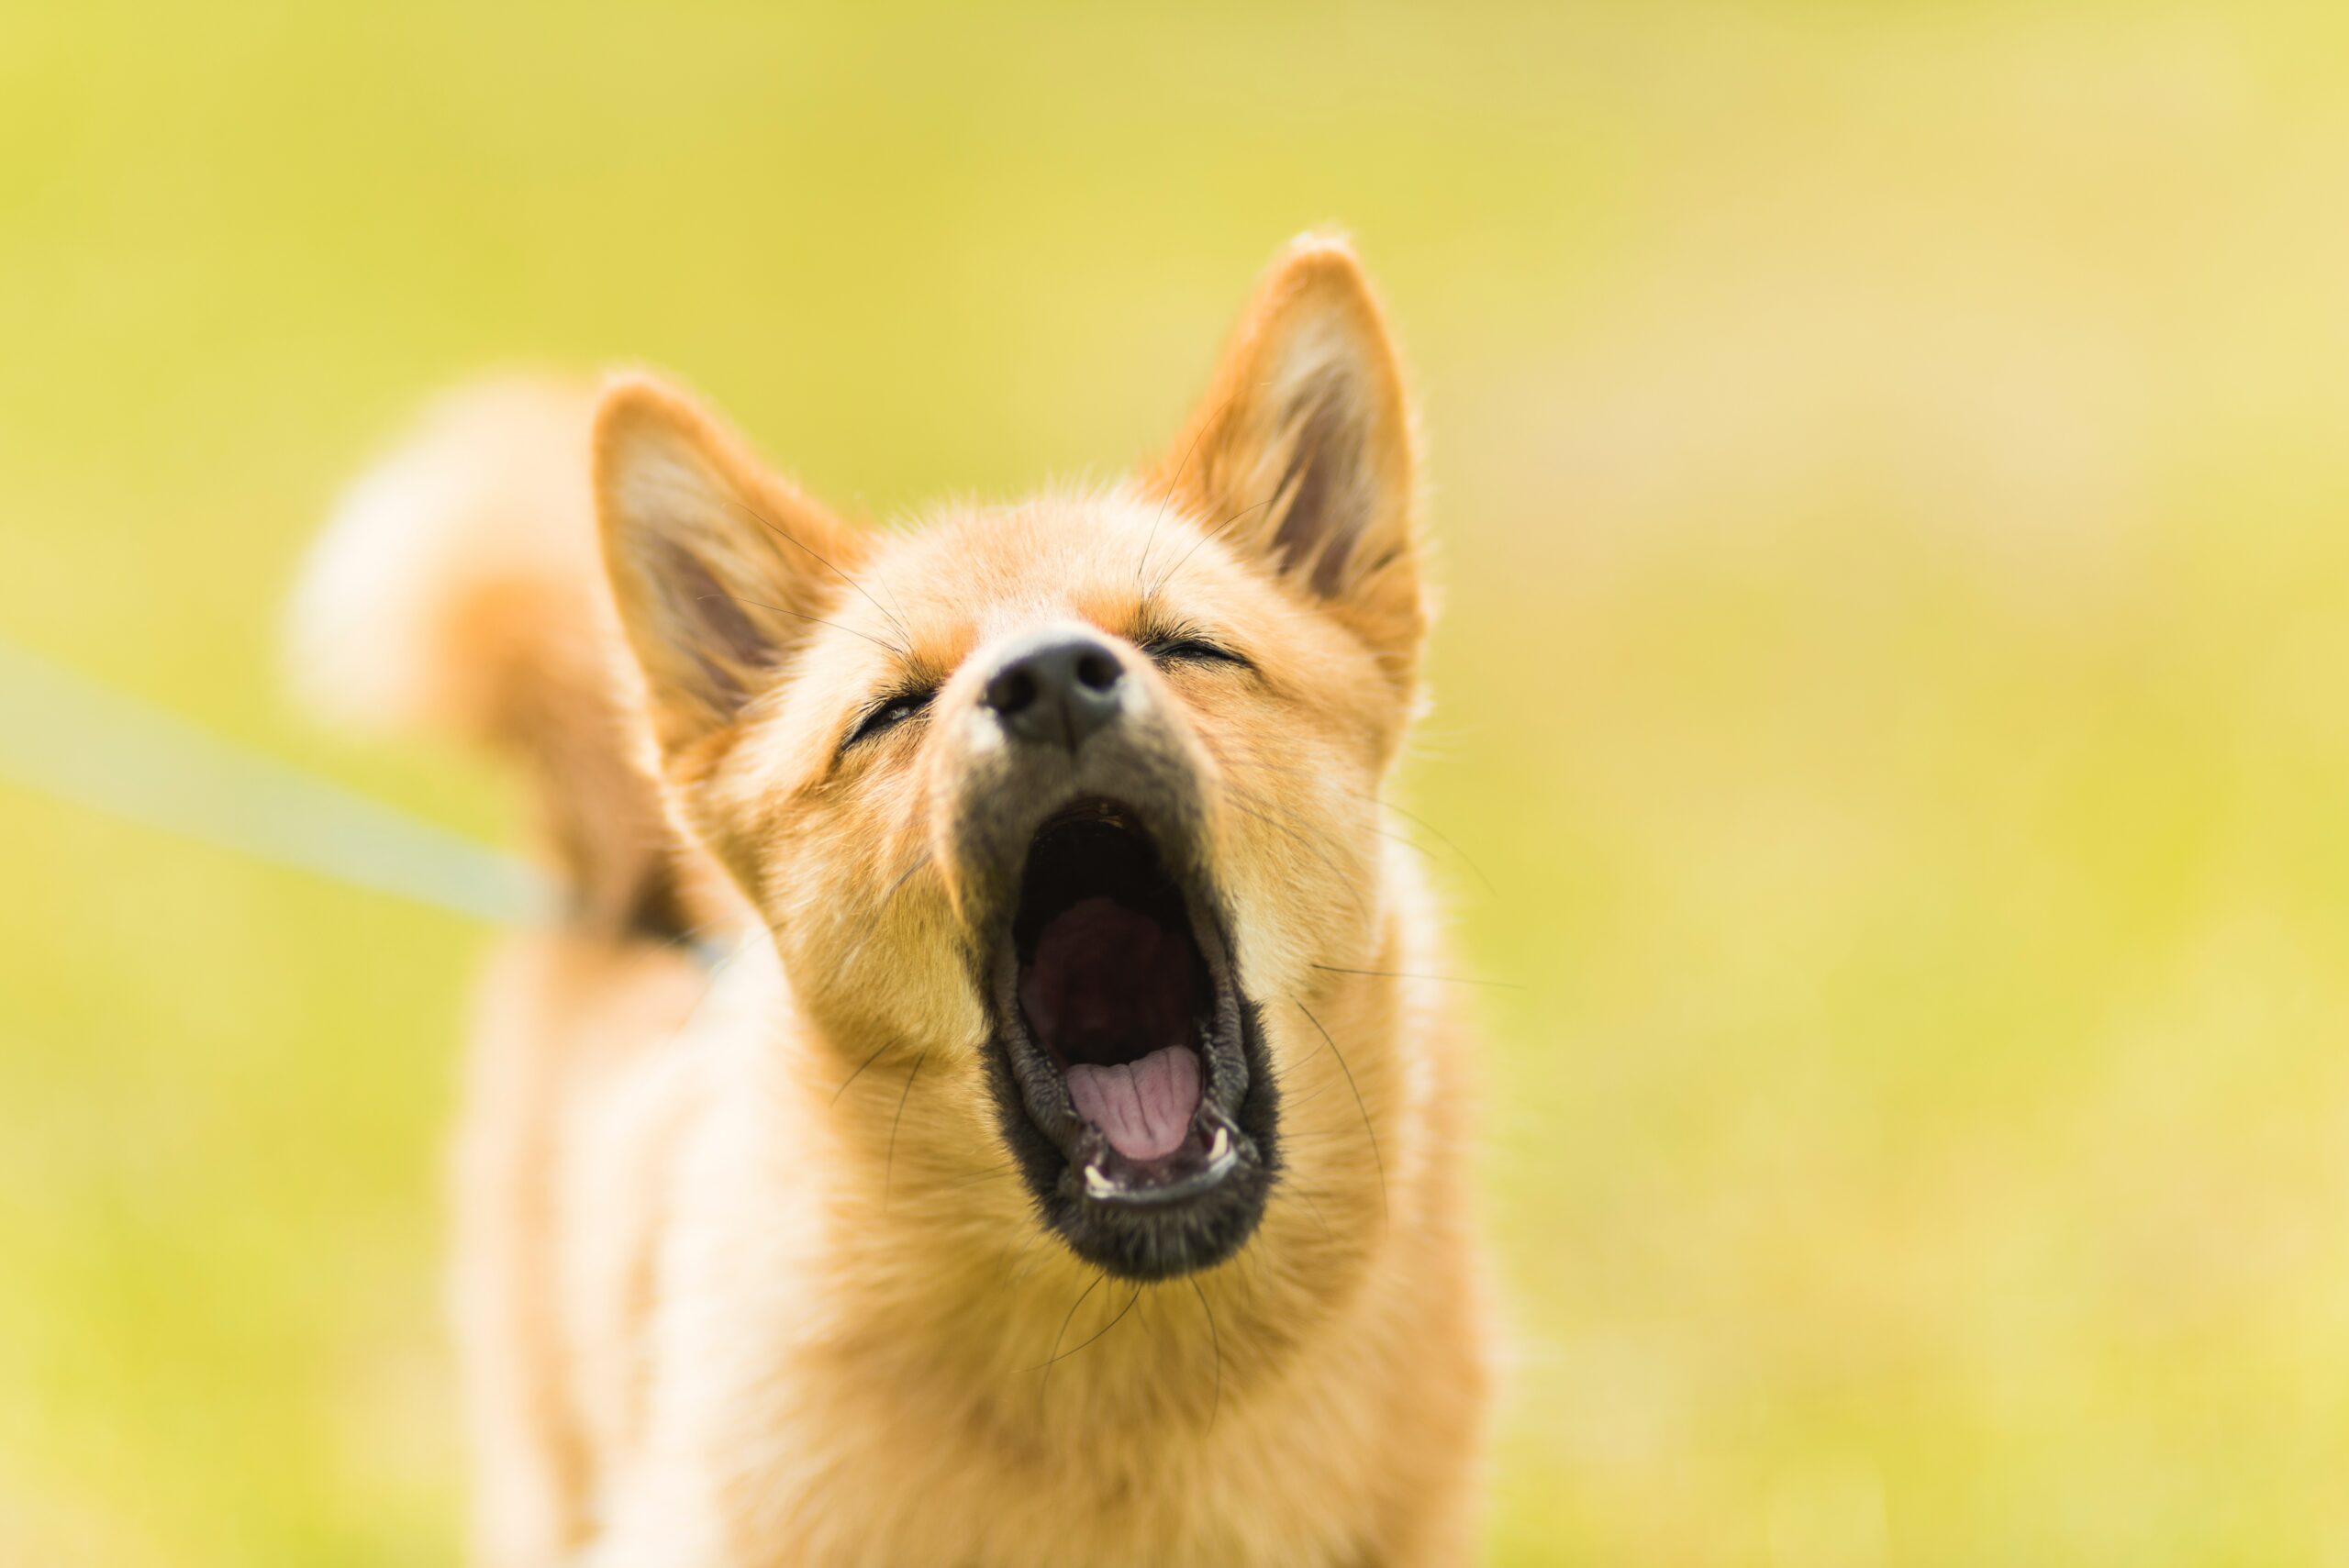 Why Do Dogs Howl? The Evolutionary Link Between Wolves and Dogs